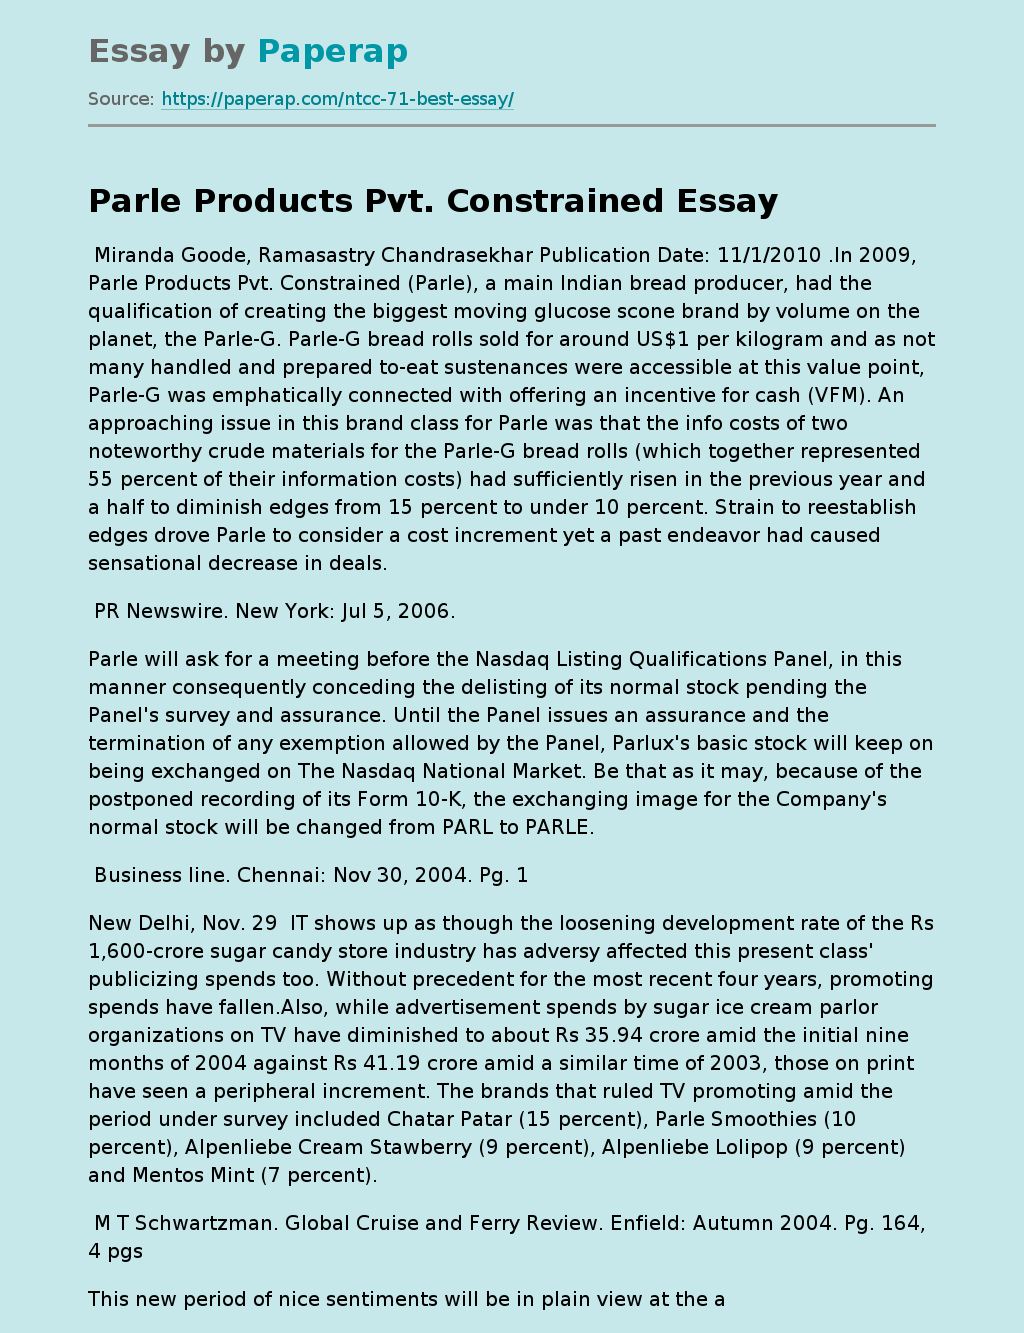 Parle Products Pvt. Constrained